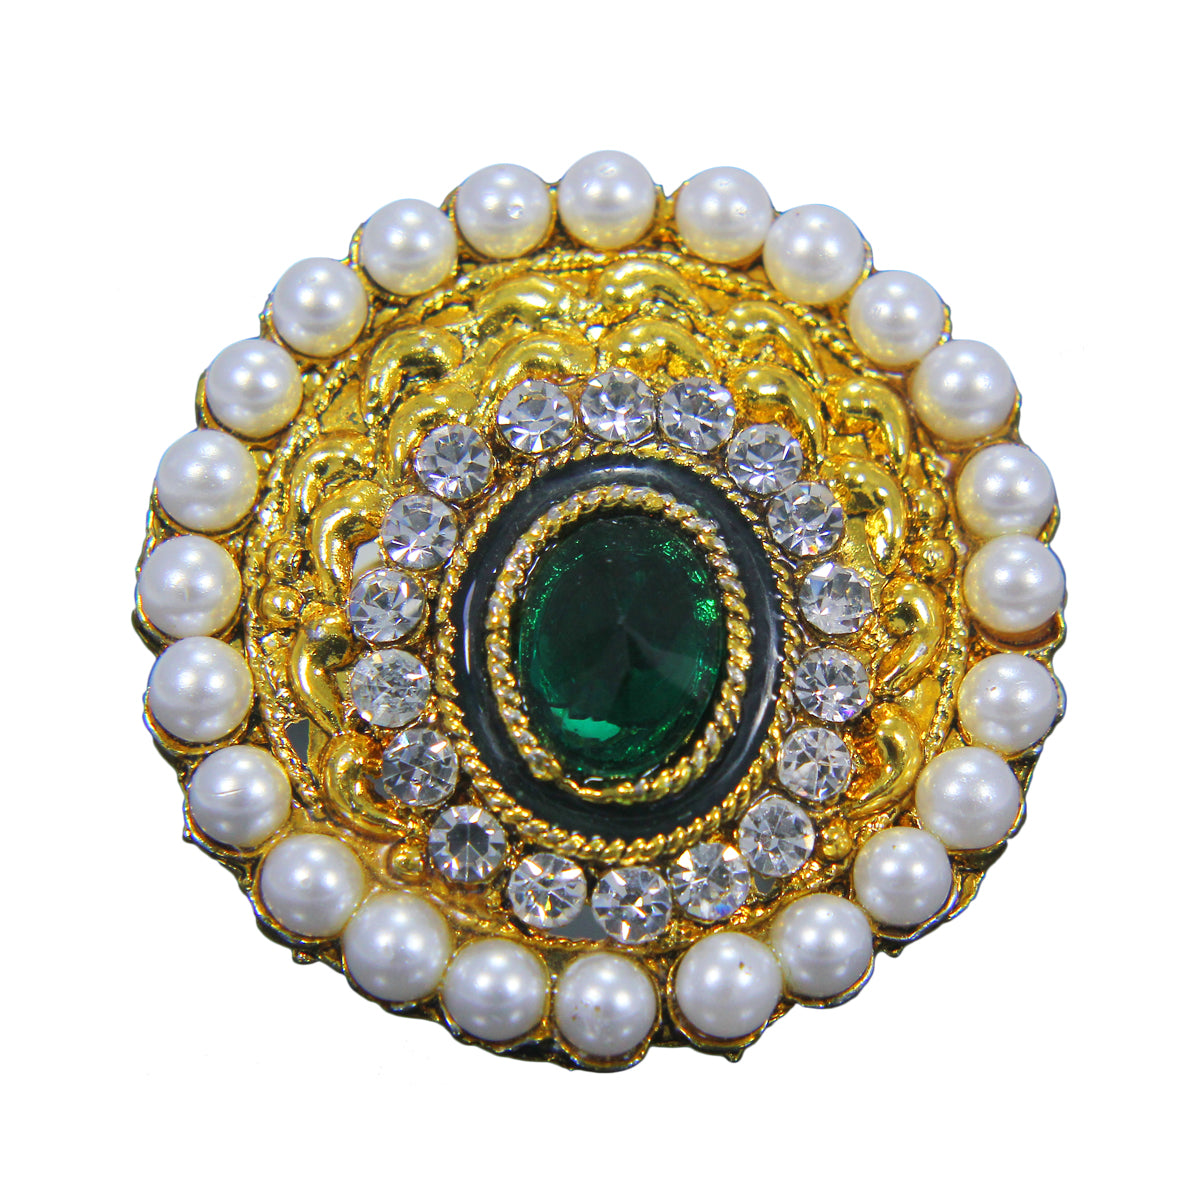 Beautiful Peacock Design Pearl Ring with Green White Crystal Stones